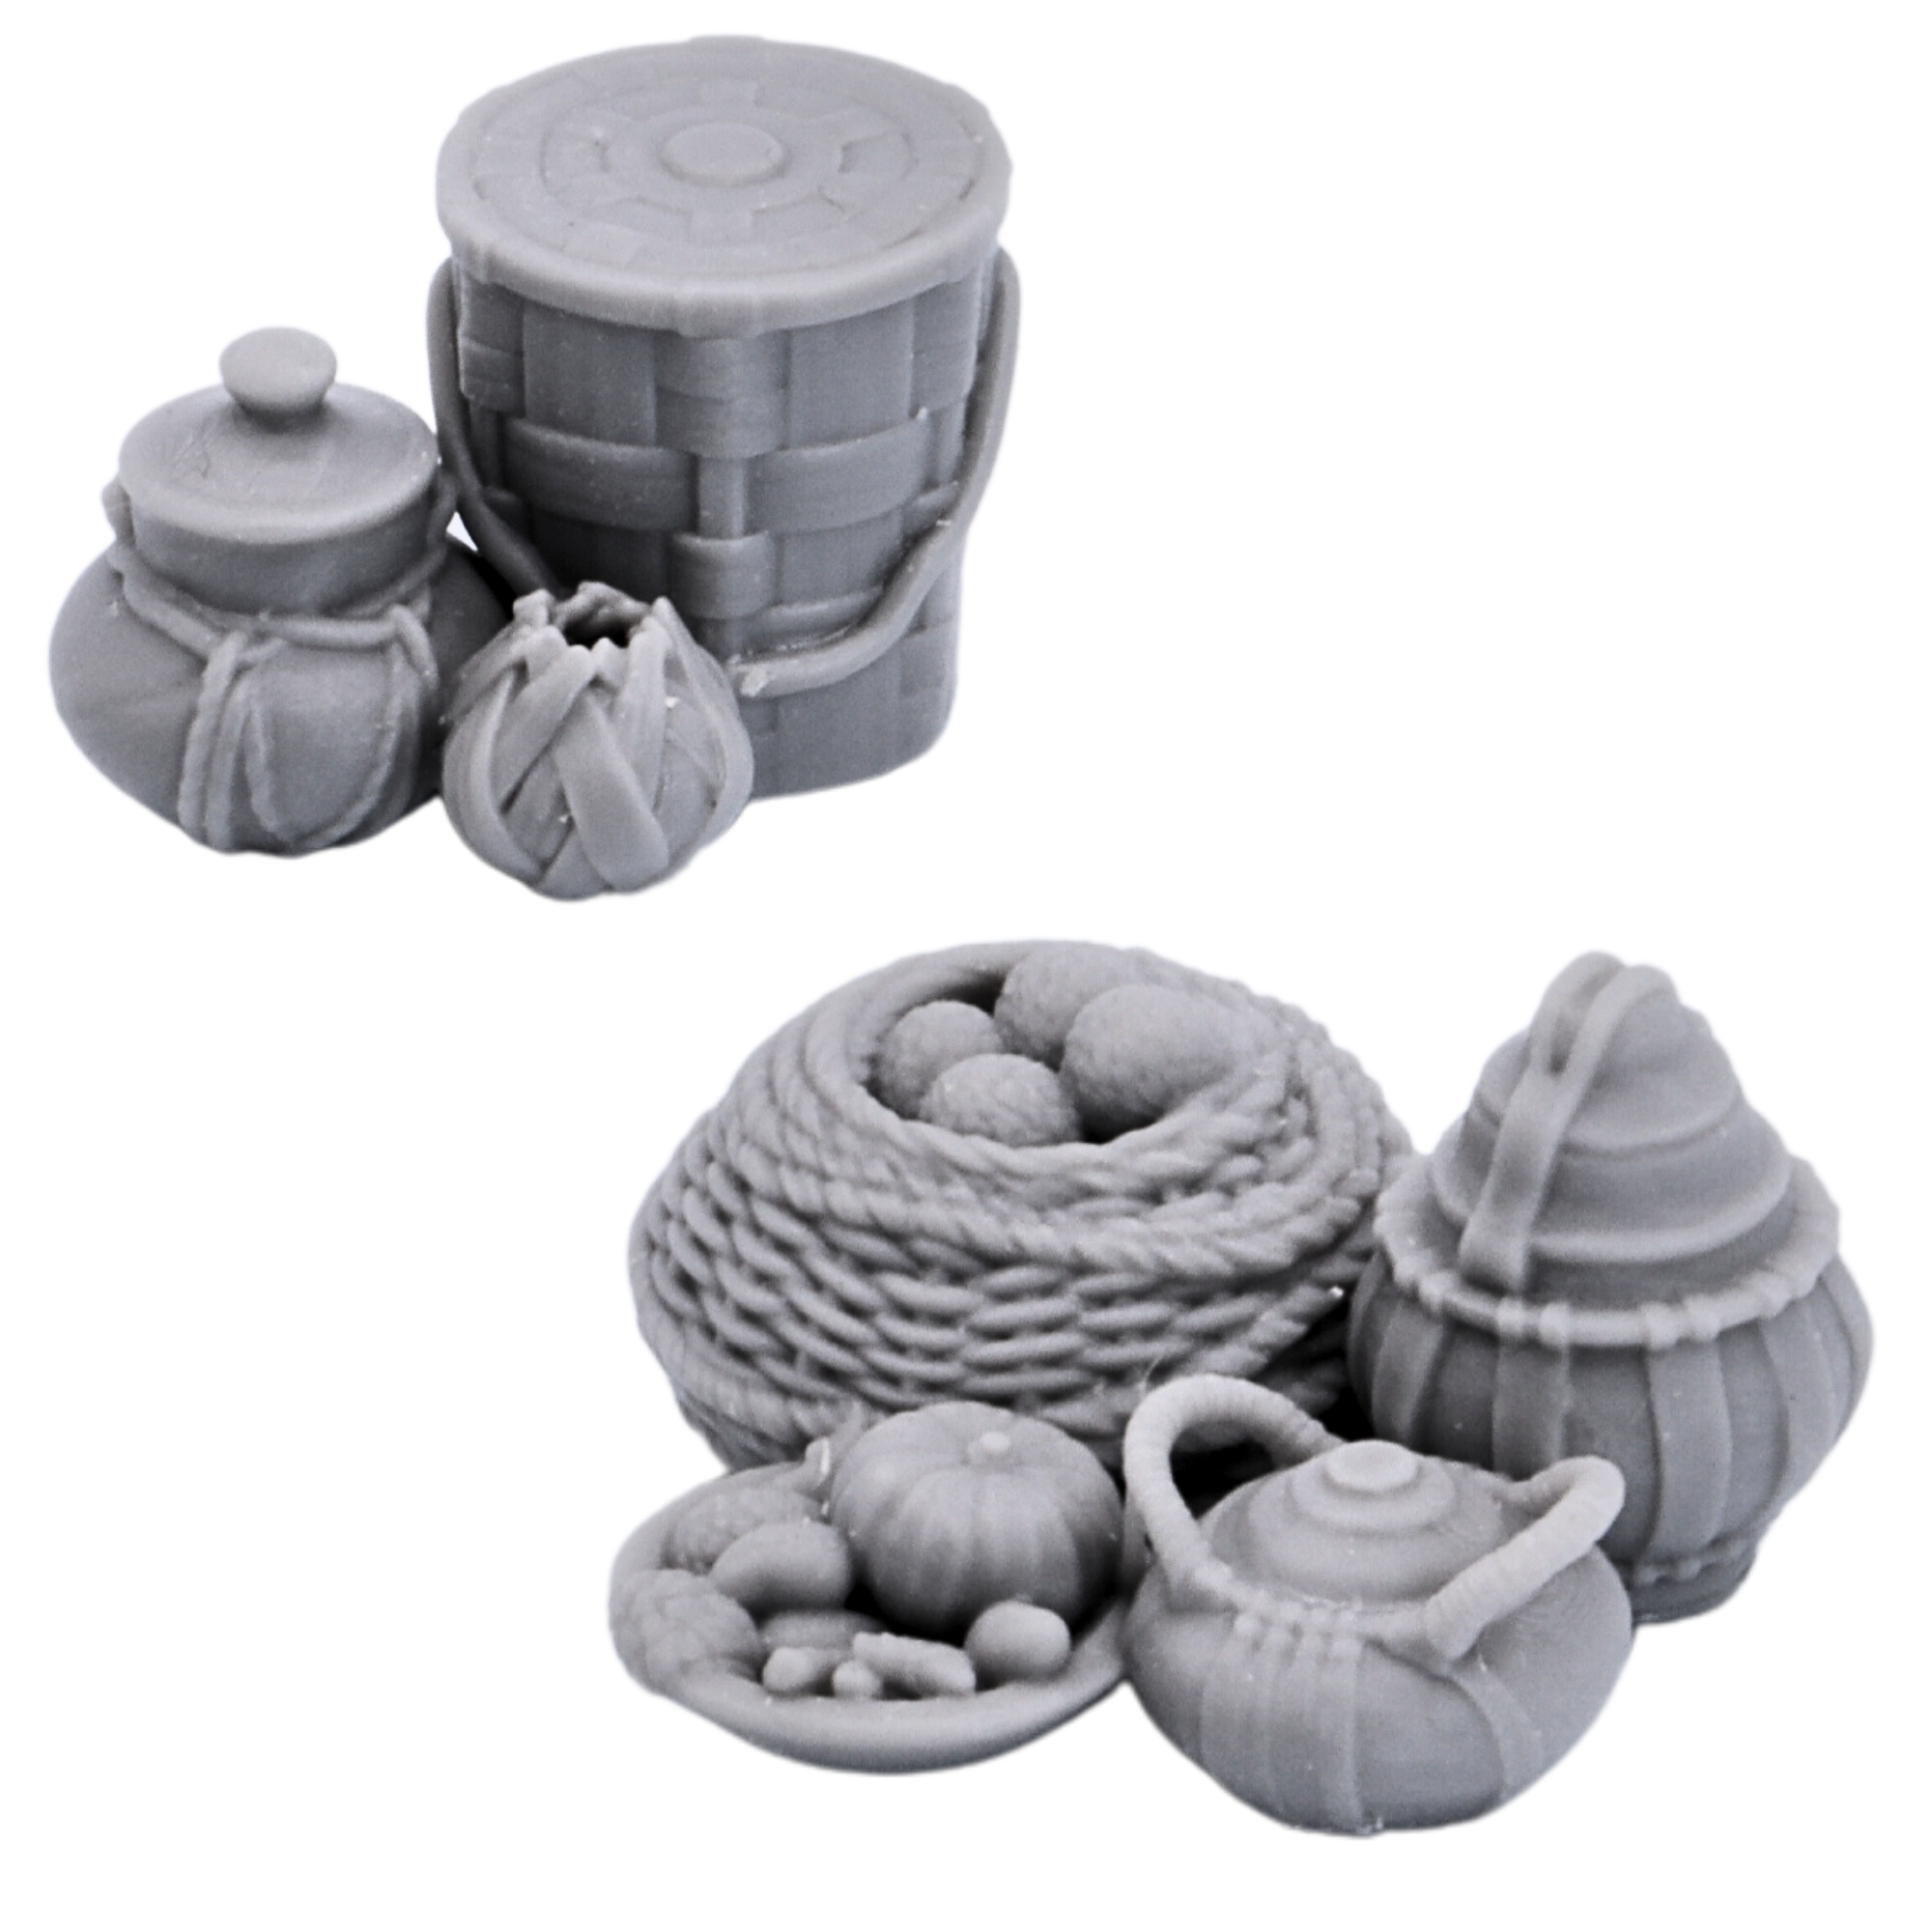 Tabletop Accessories Home Decors by Printable Scenery